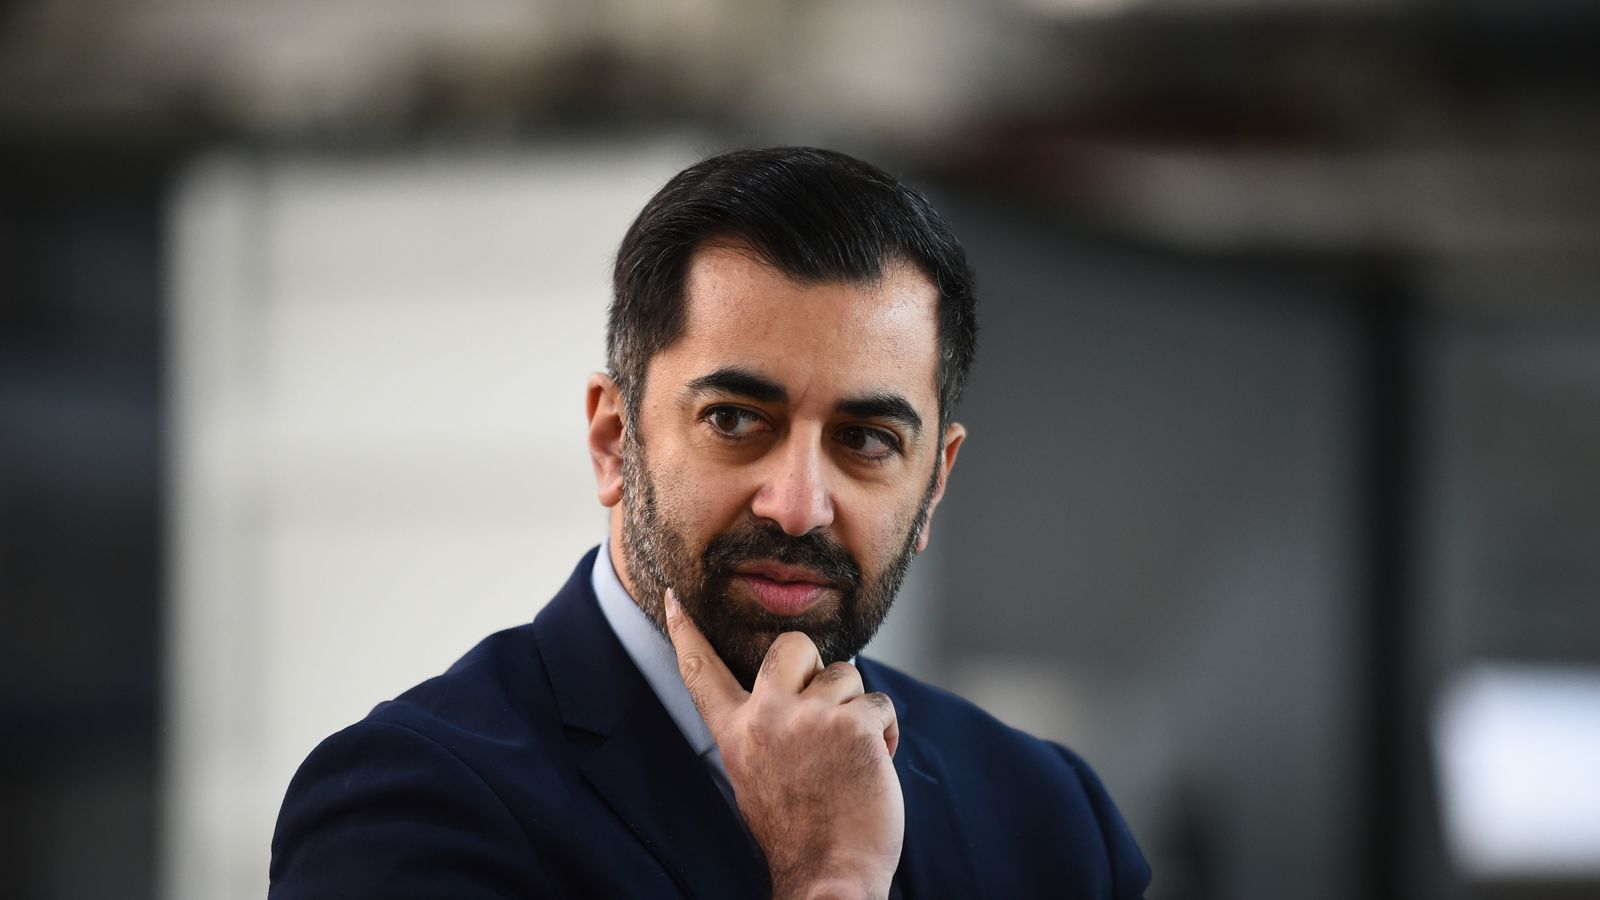 Is Humza Yousaf entitled to £52,000 a year for life after his resignation?